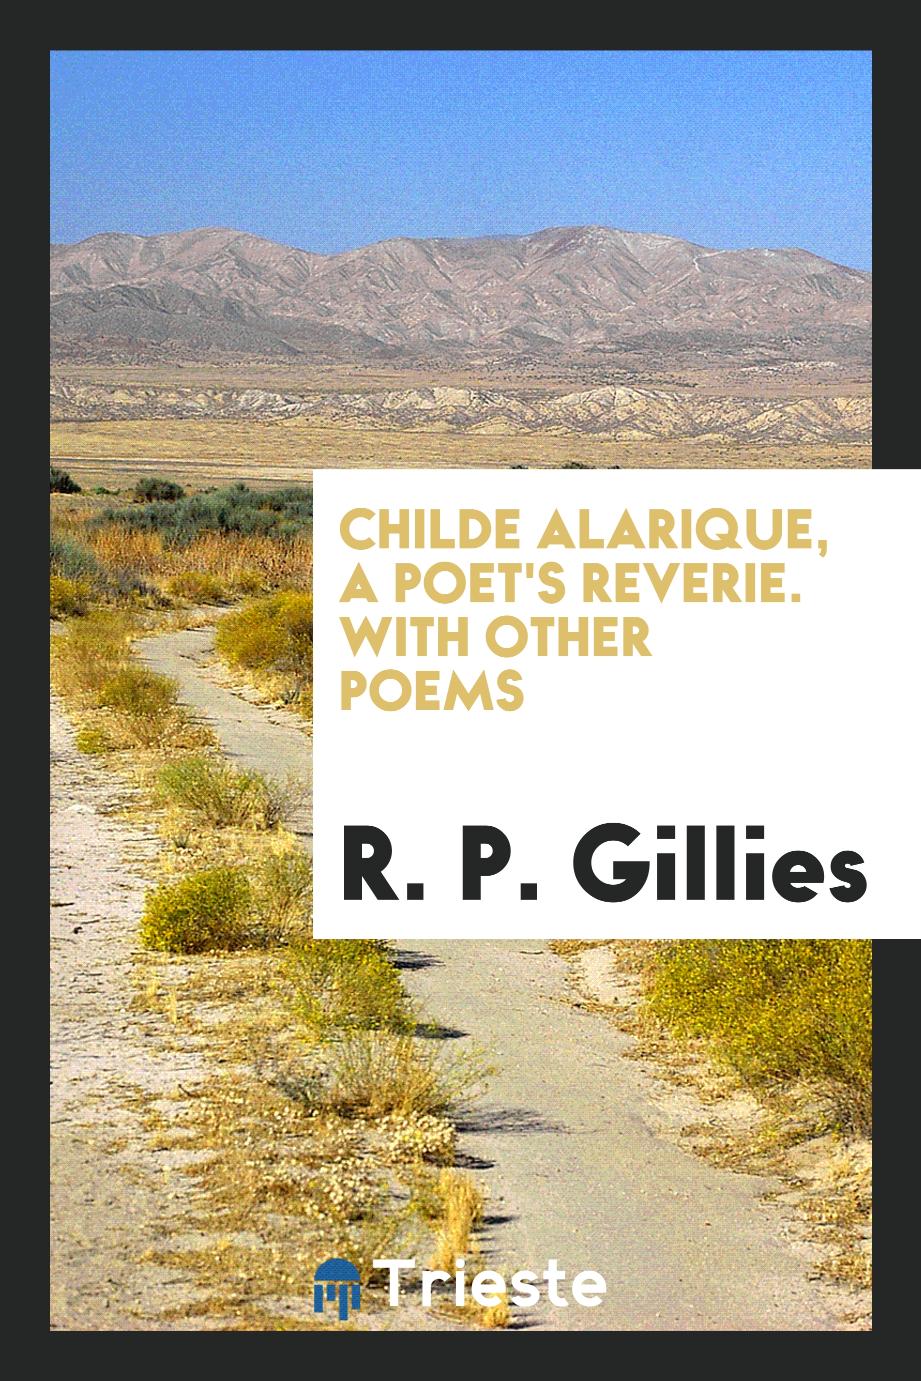 Childe Alarique, a poet's reverie. With other poems